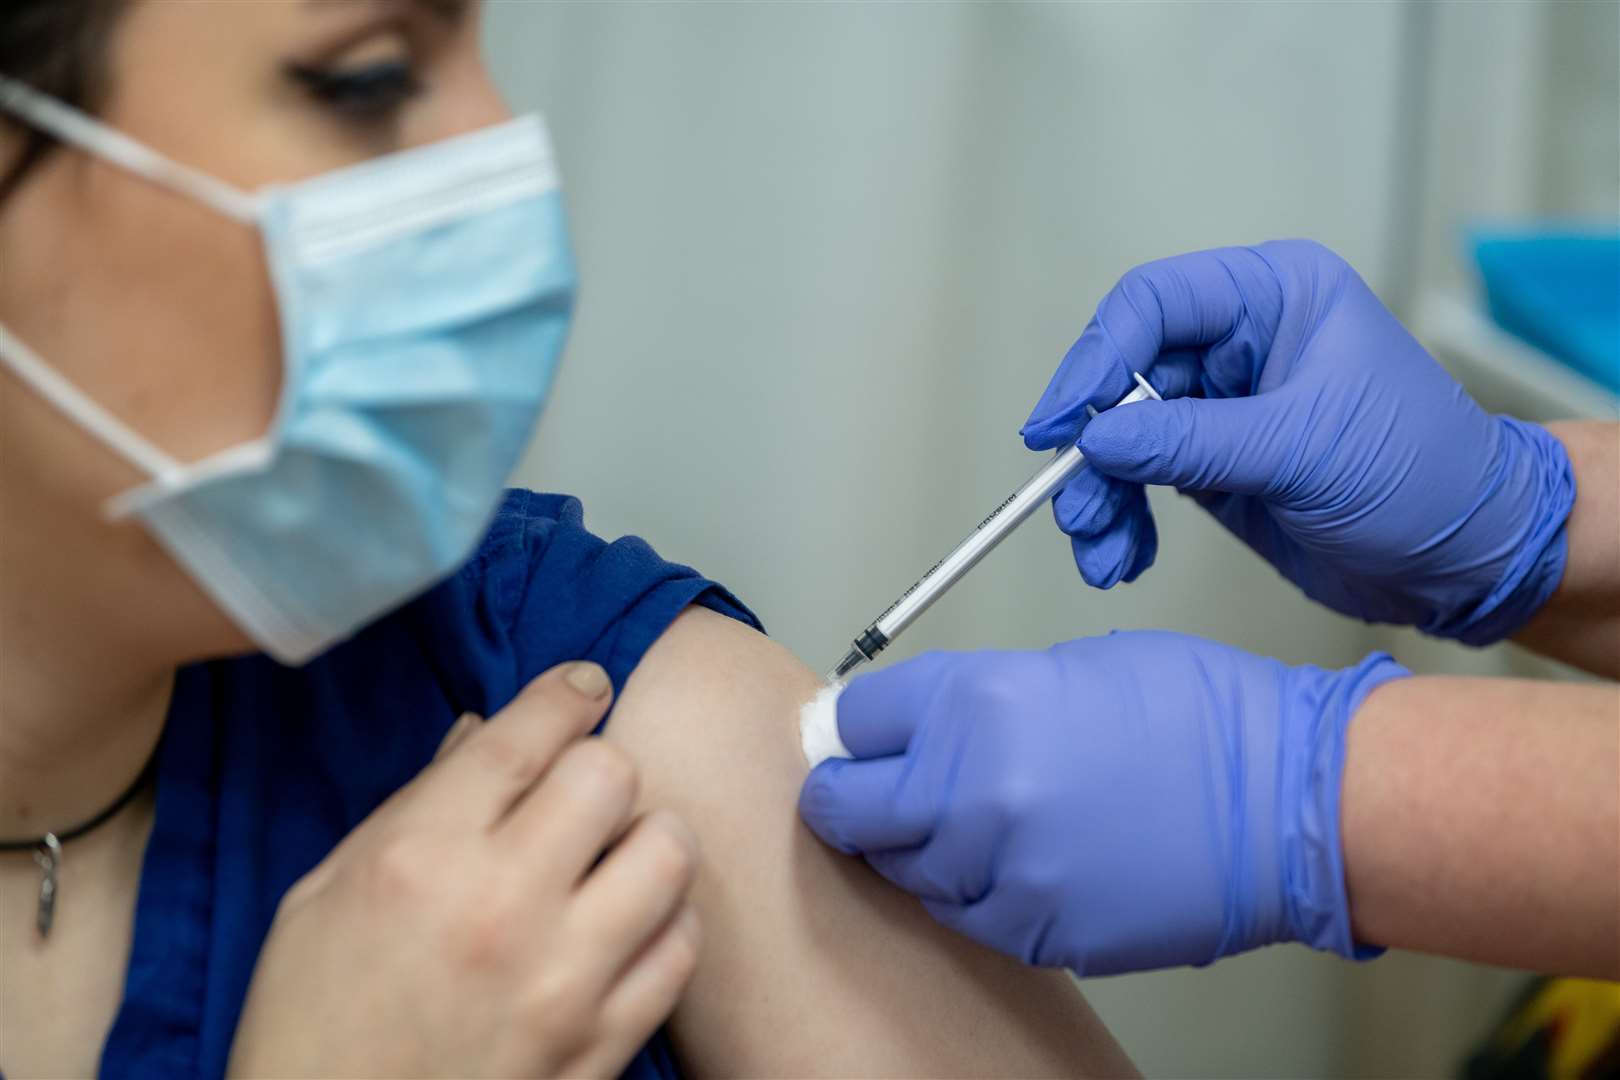 Staff have been helping administer vaccines to those who can't leave home. Stock photo